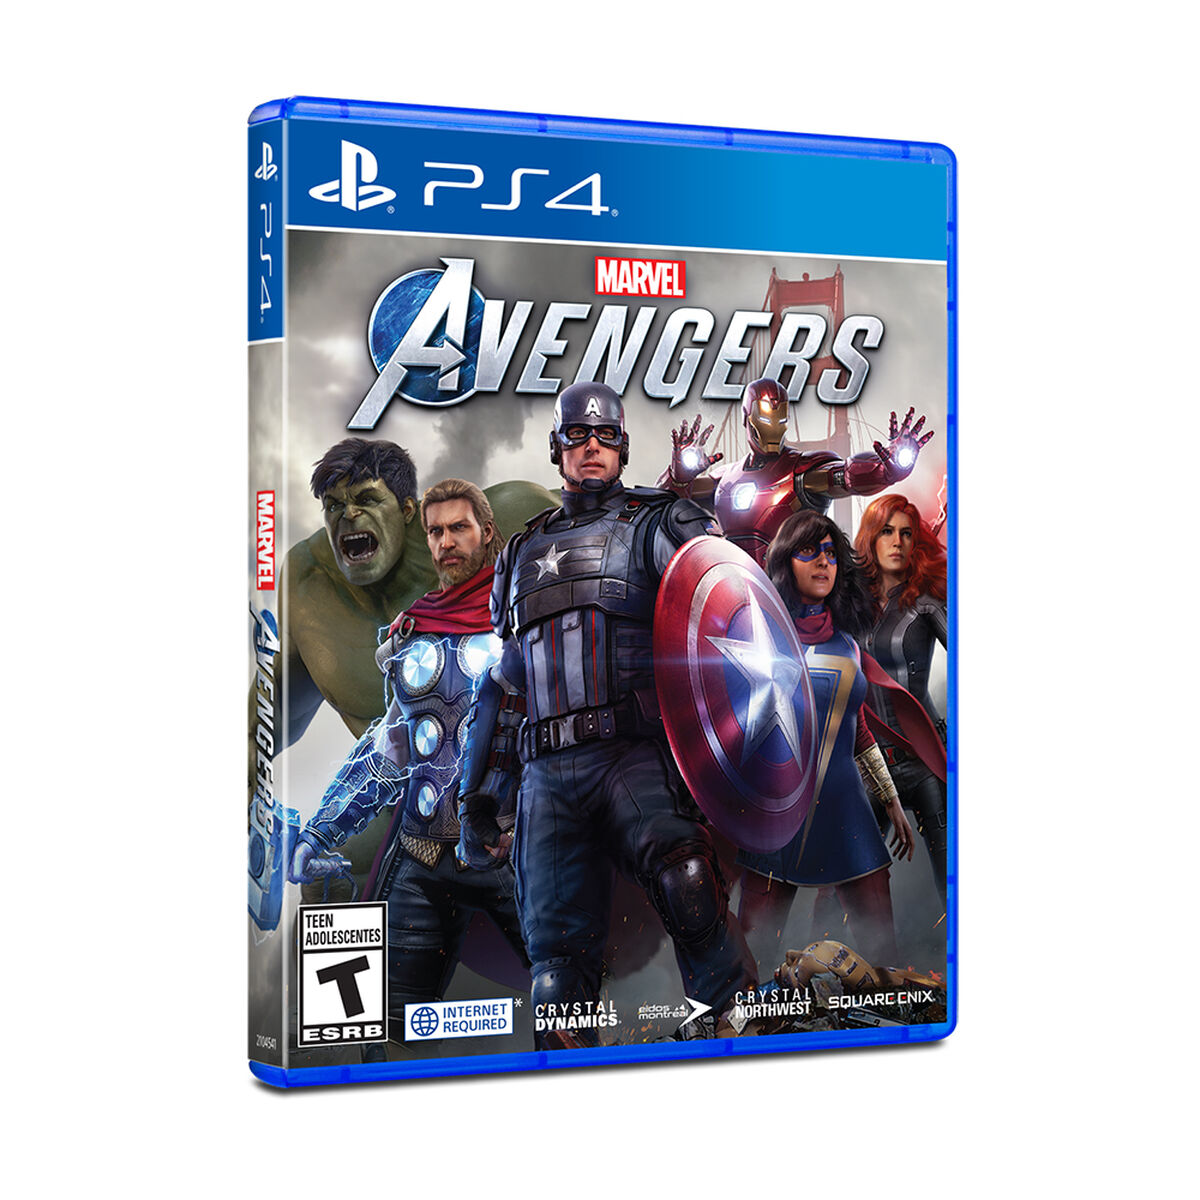 Juego PS4 Square Enix Marvel Avengers